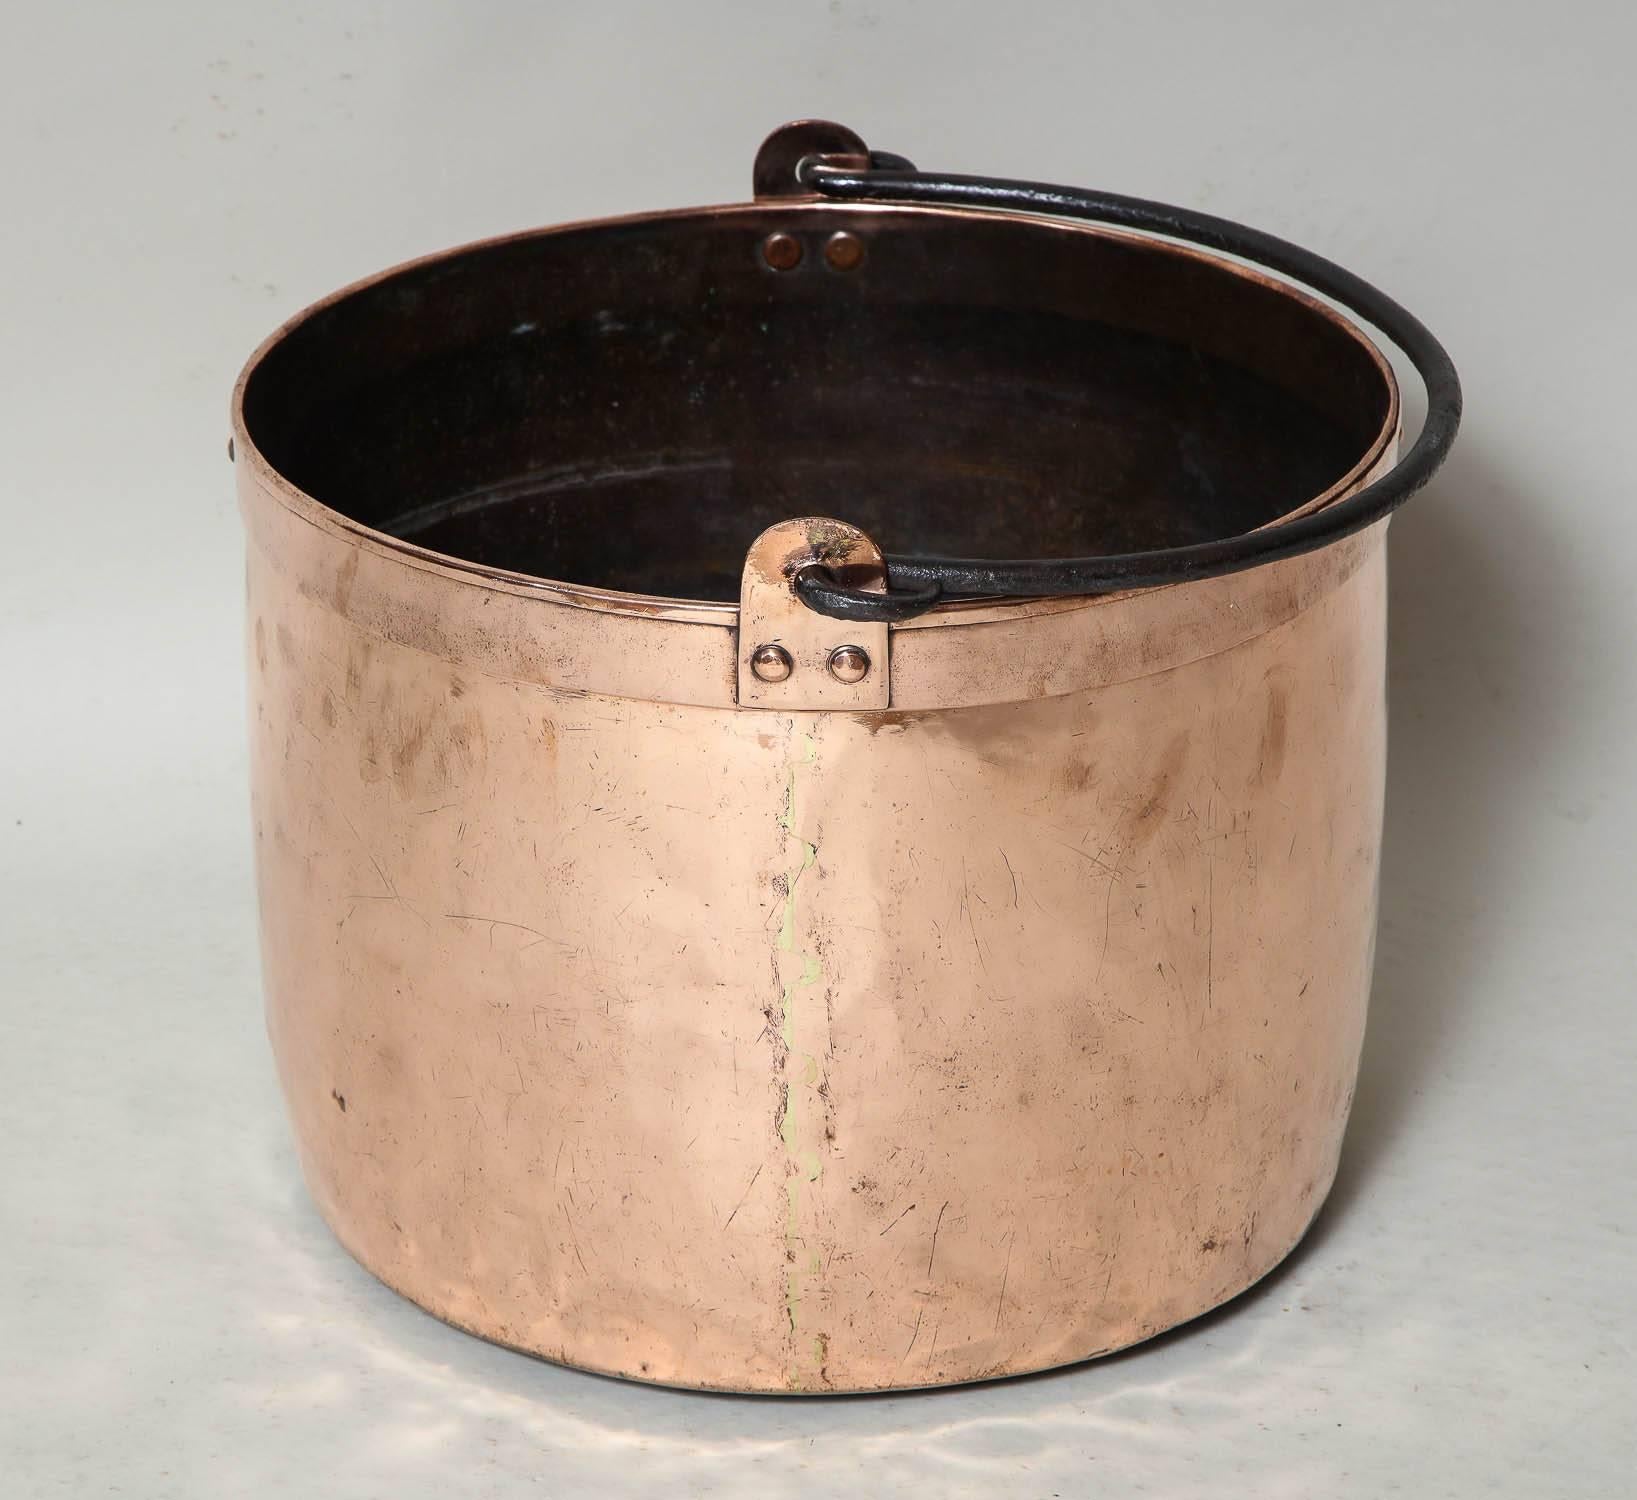 Good 19th century copper pot with rolled lip, wrought iron handle, the dovetailed seam having brass solder, the whole with great scale and ideal size for firewood.